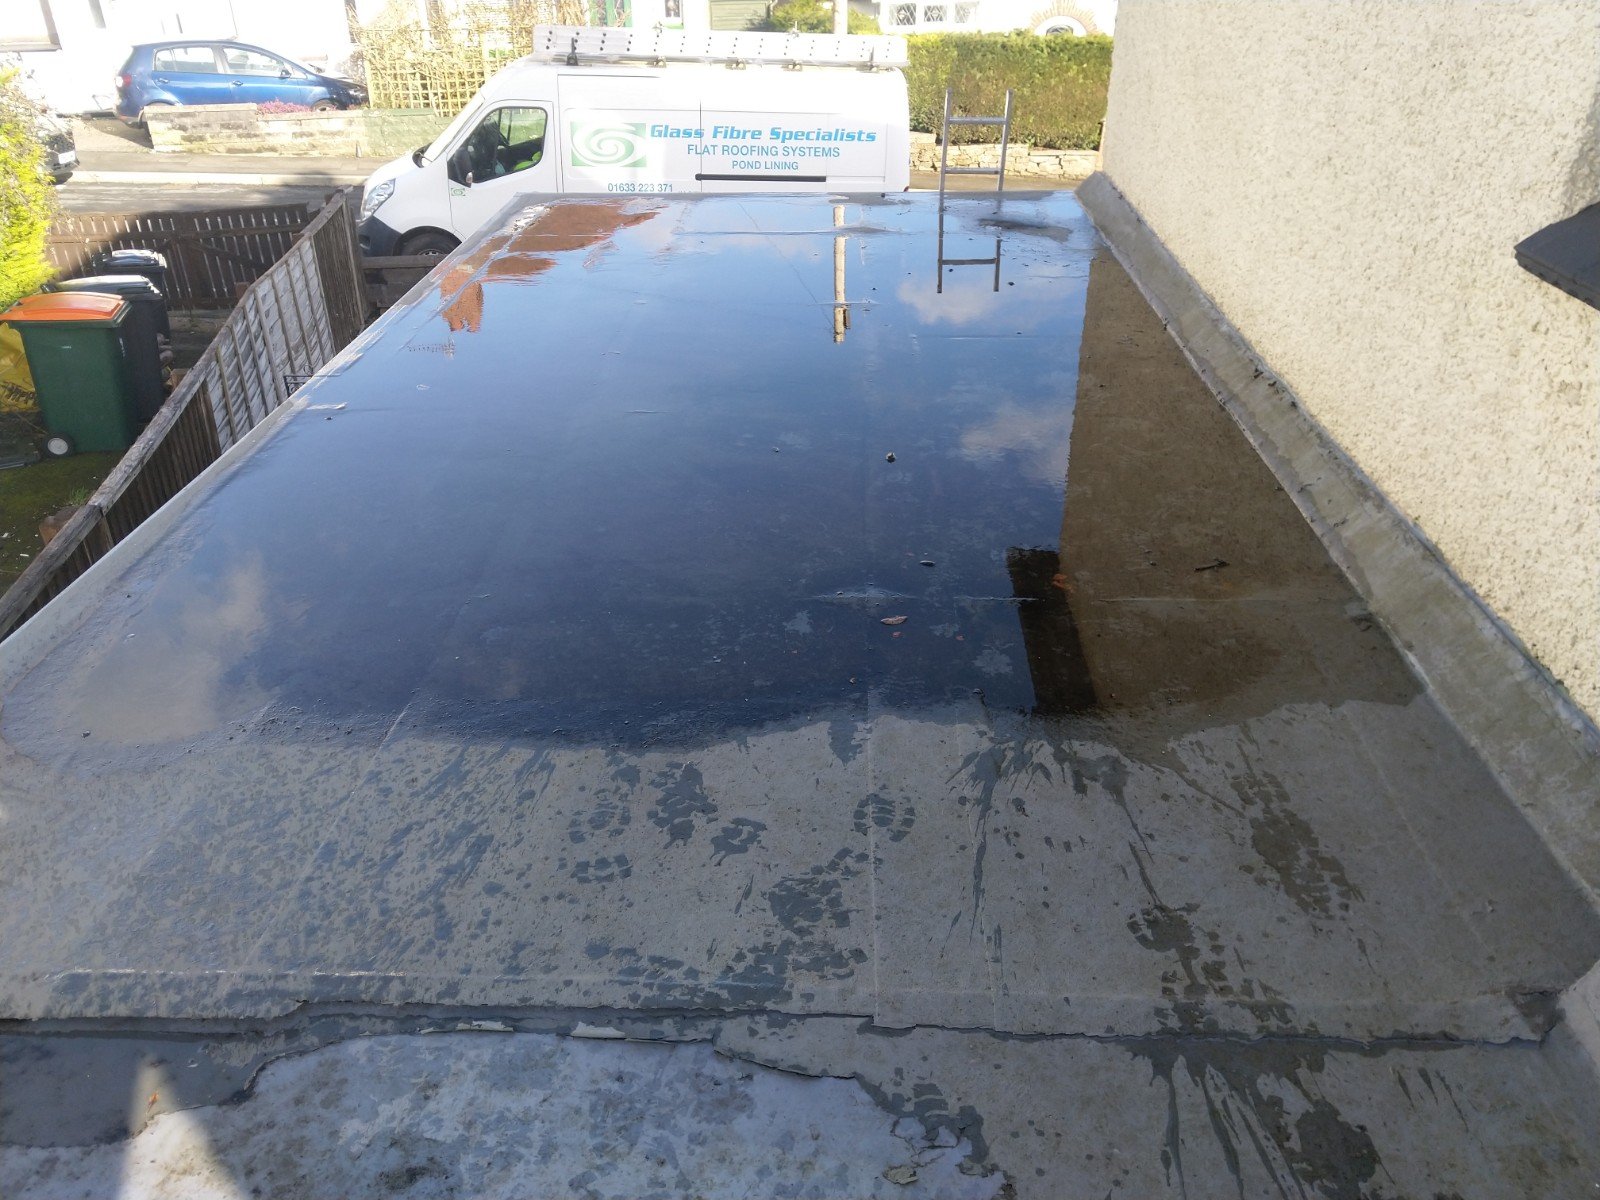 Flat roof in Newport with lots of pooling water.